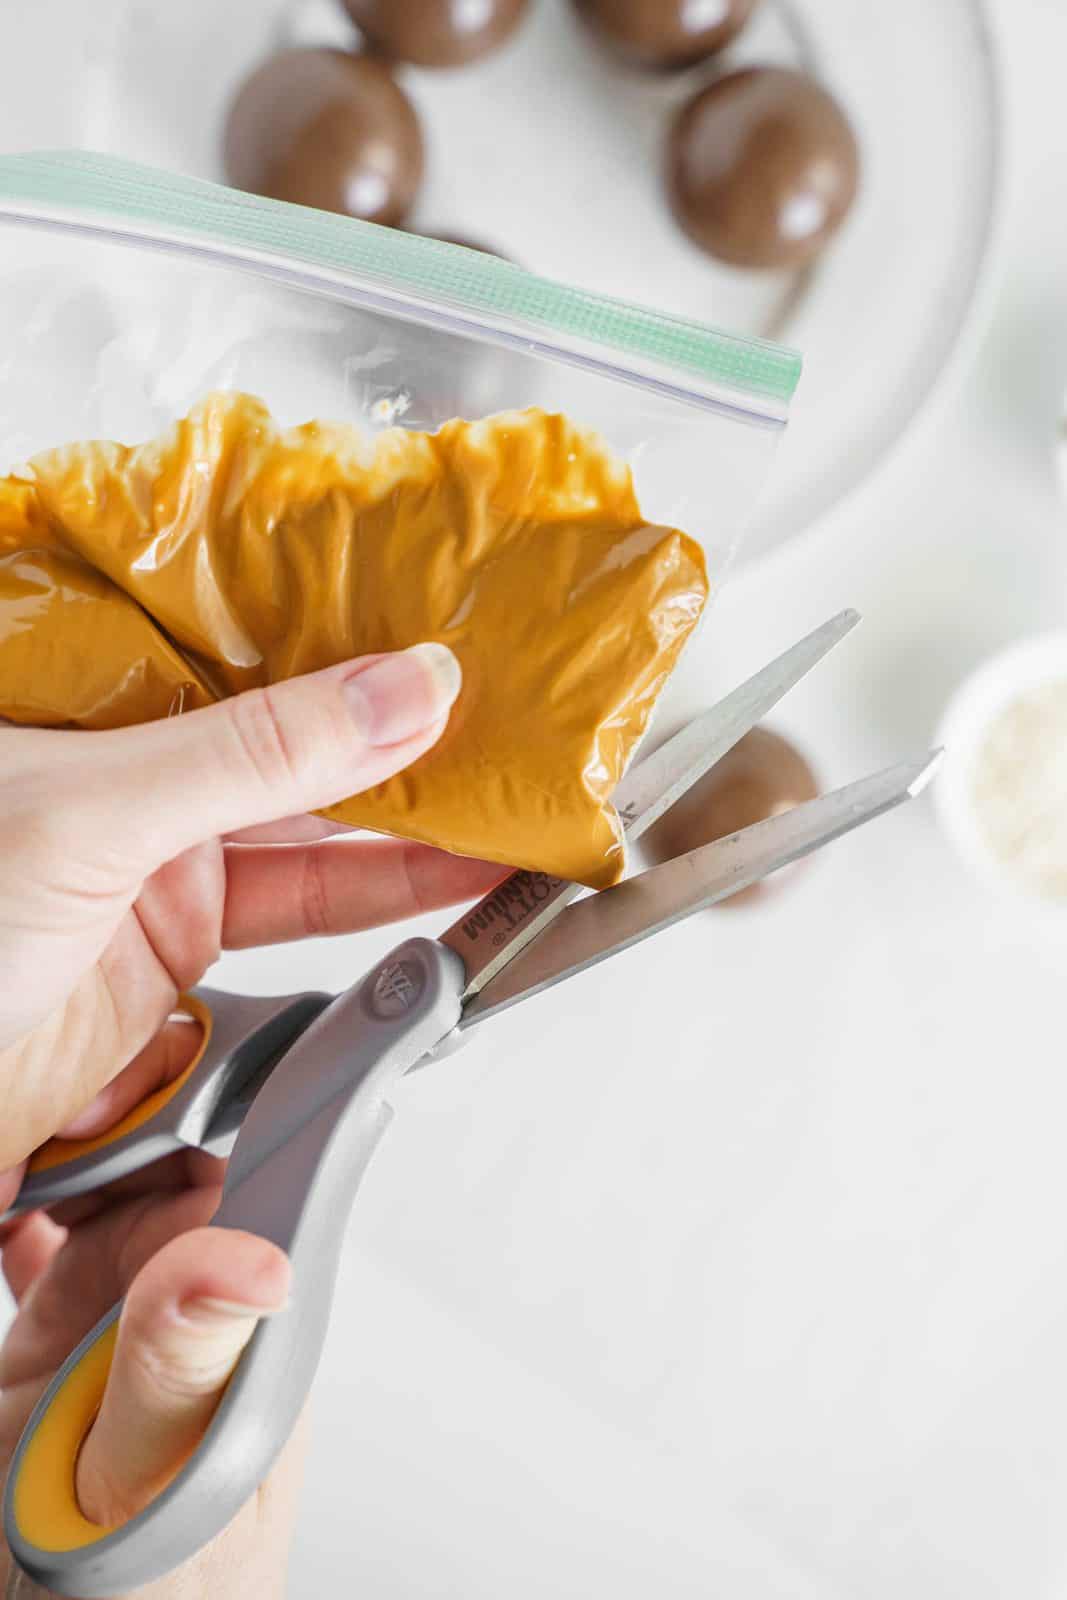 Melted peanut butter candy melts added to bag with tip being cut off.